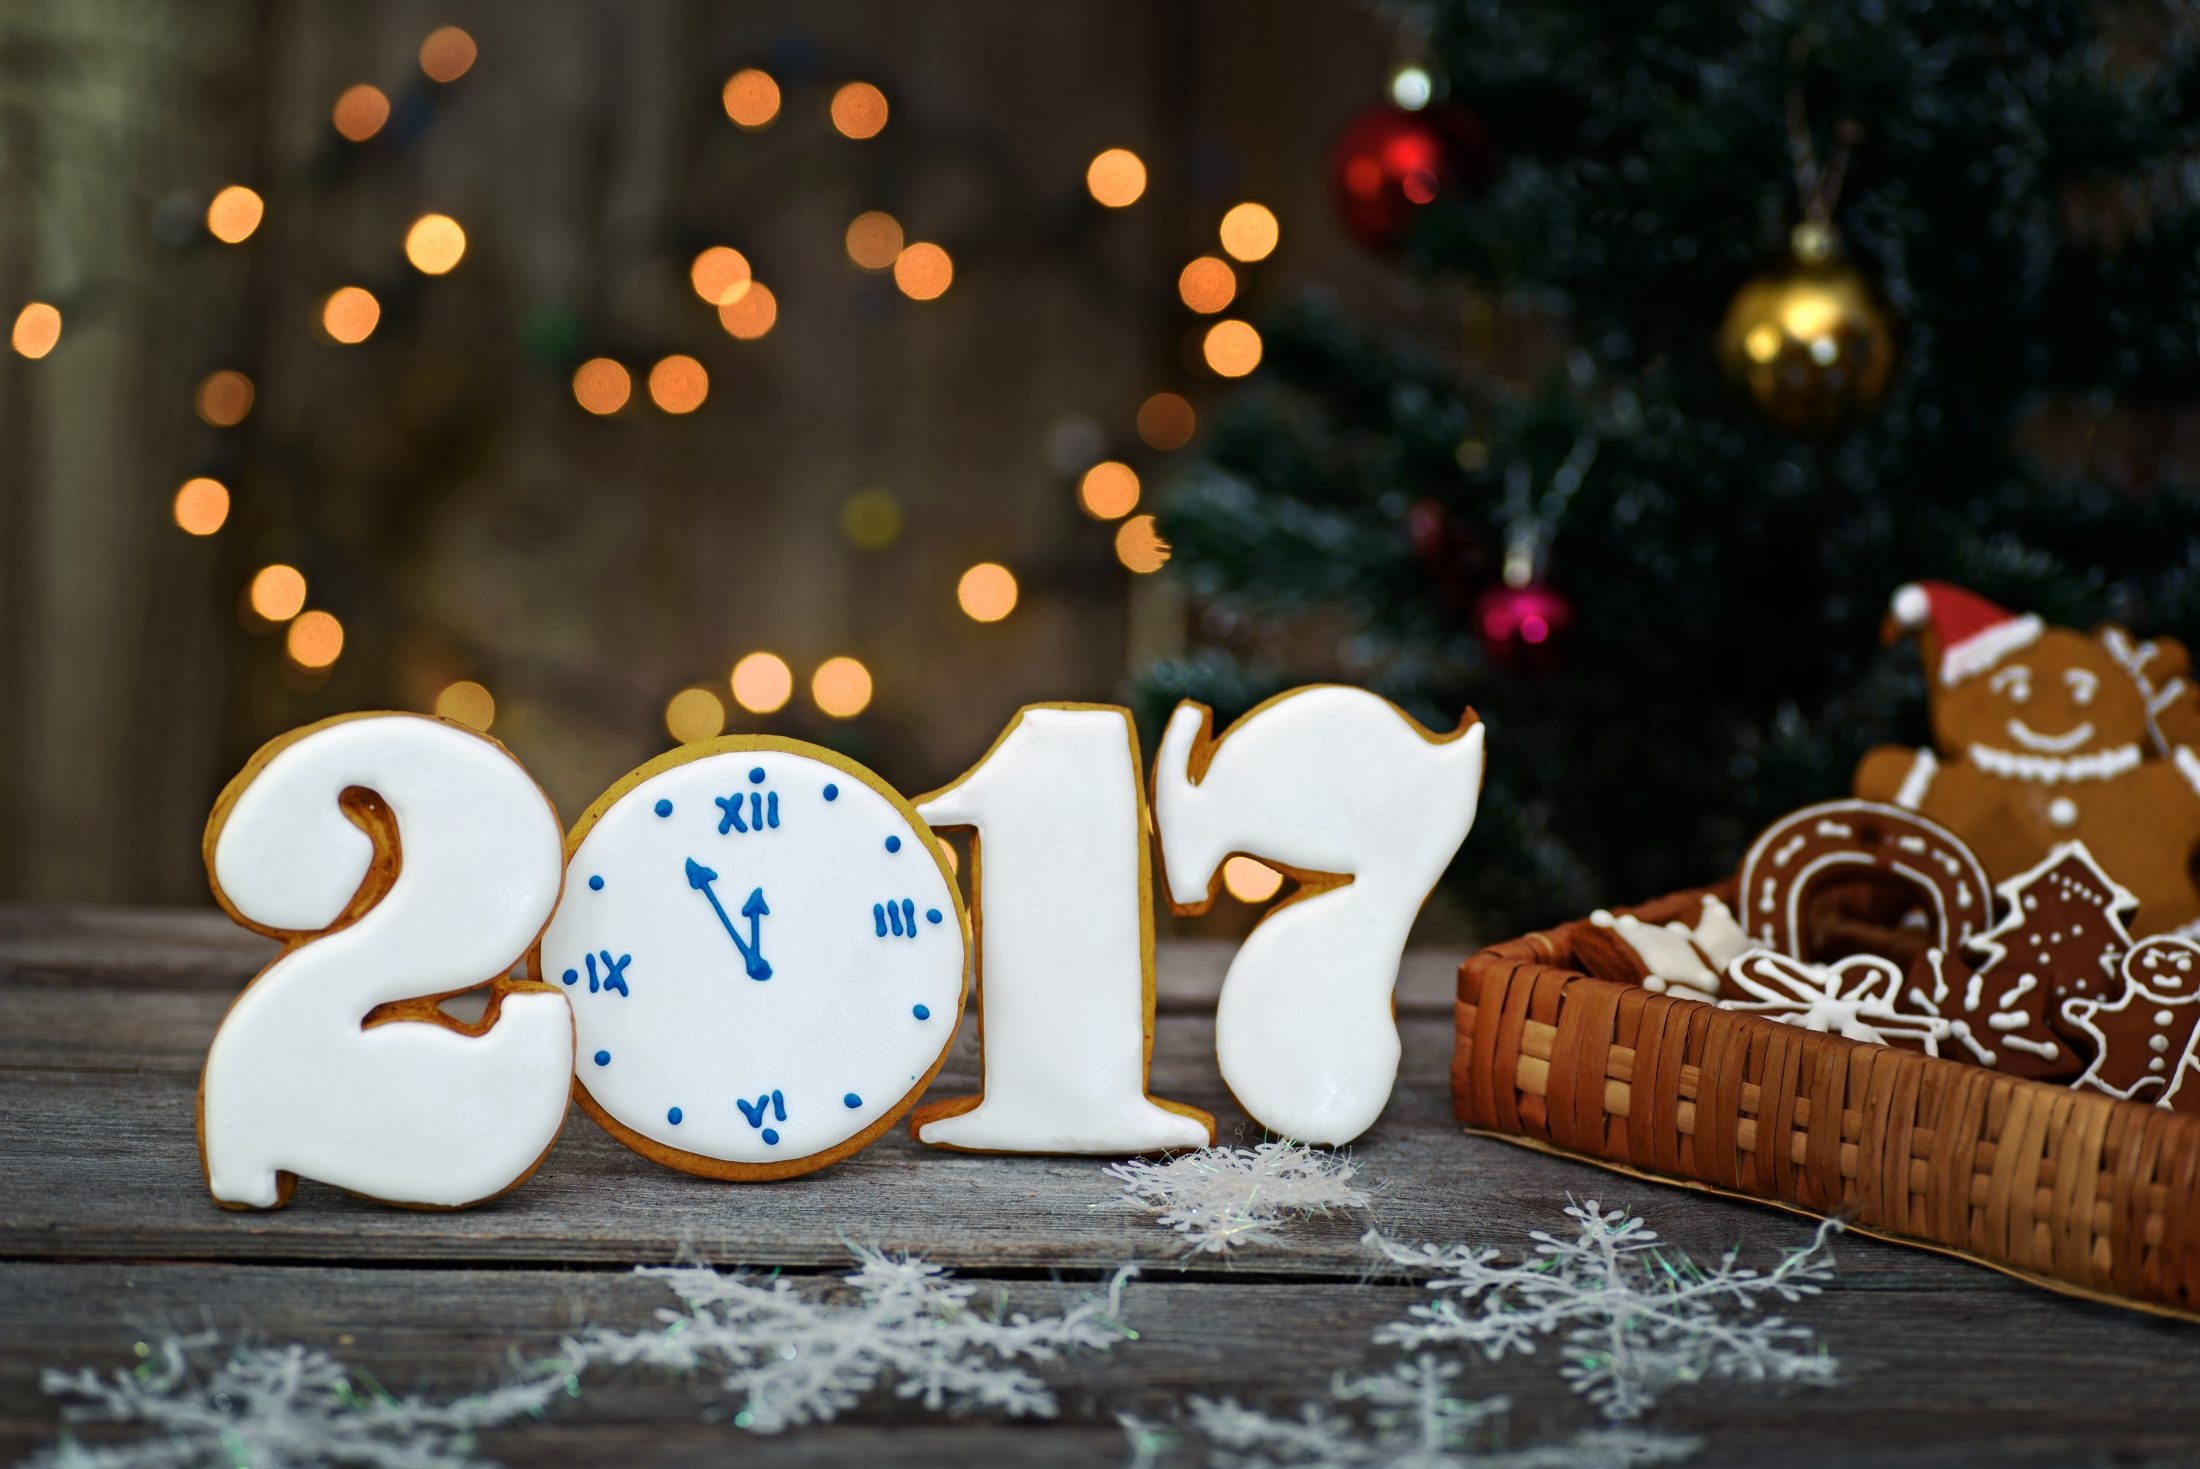 Holiday New Year 2017 HD Wallpaper | Background Image